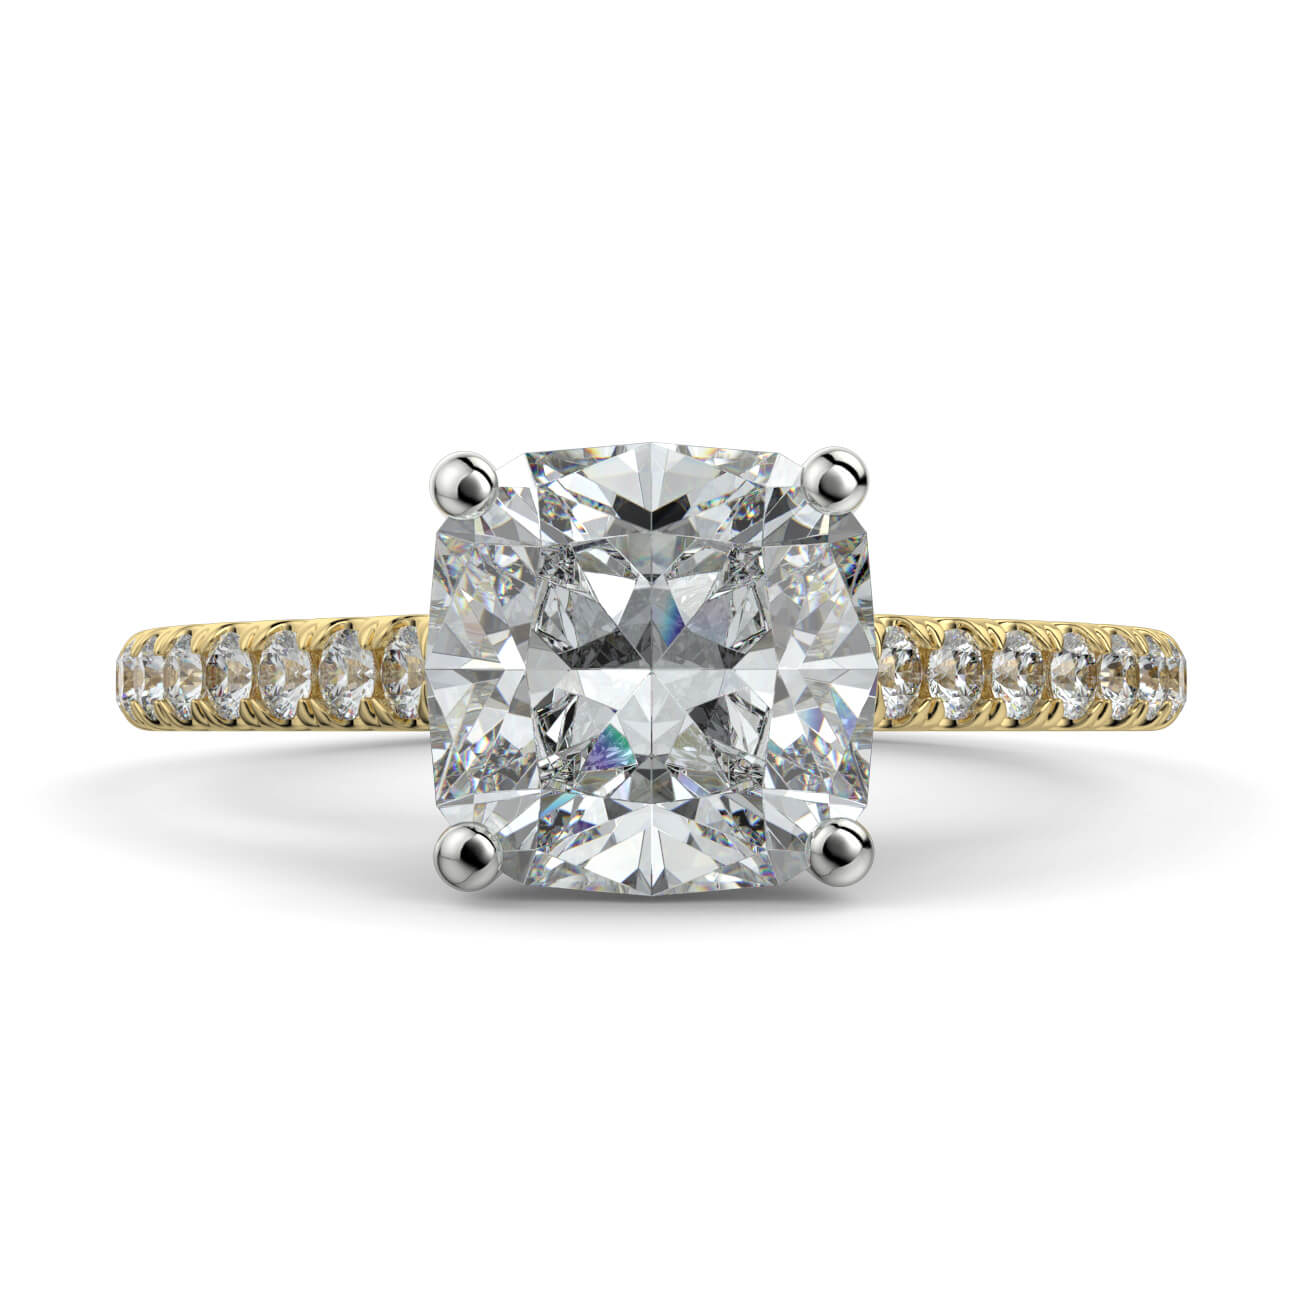 Cushion Cut diamond cathedral engagement ring in yellow and white gold – Australian Diamond Network